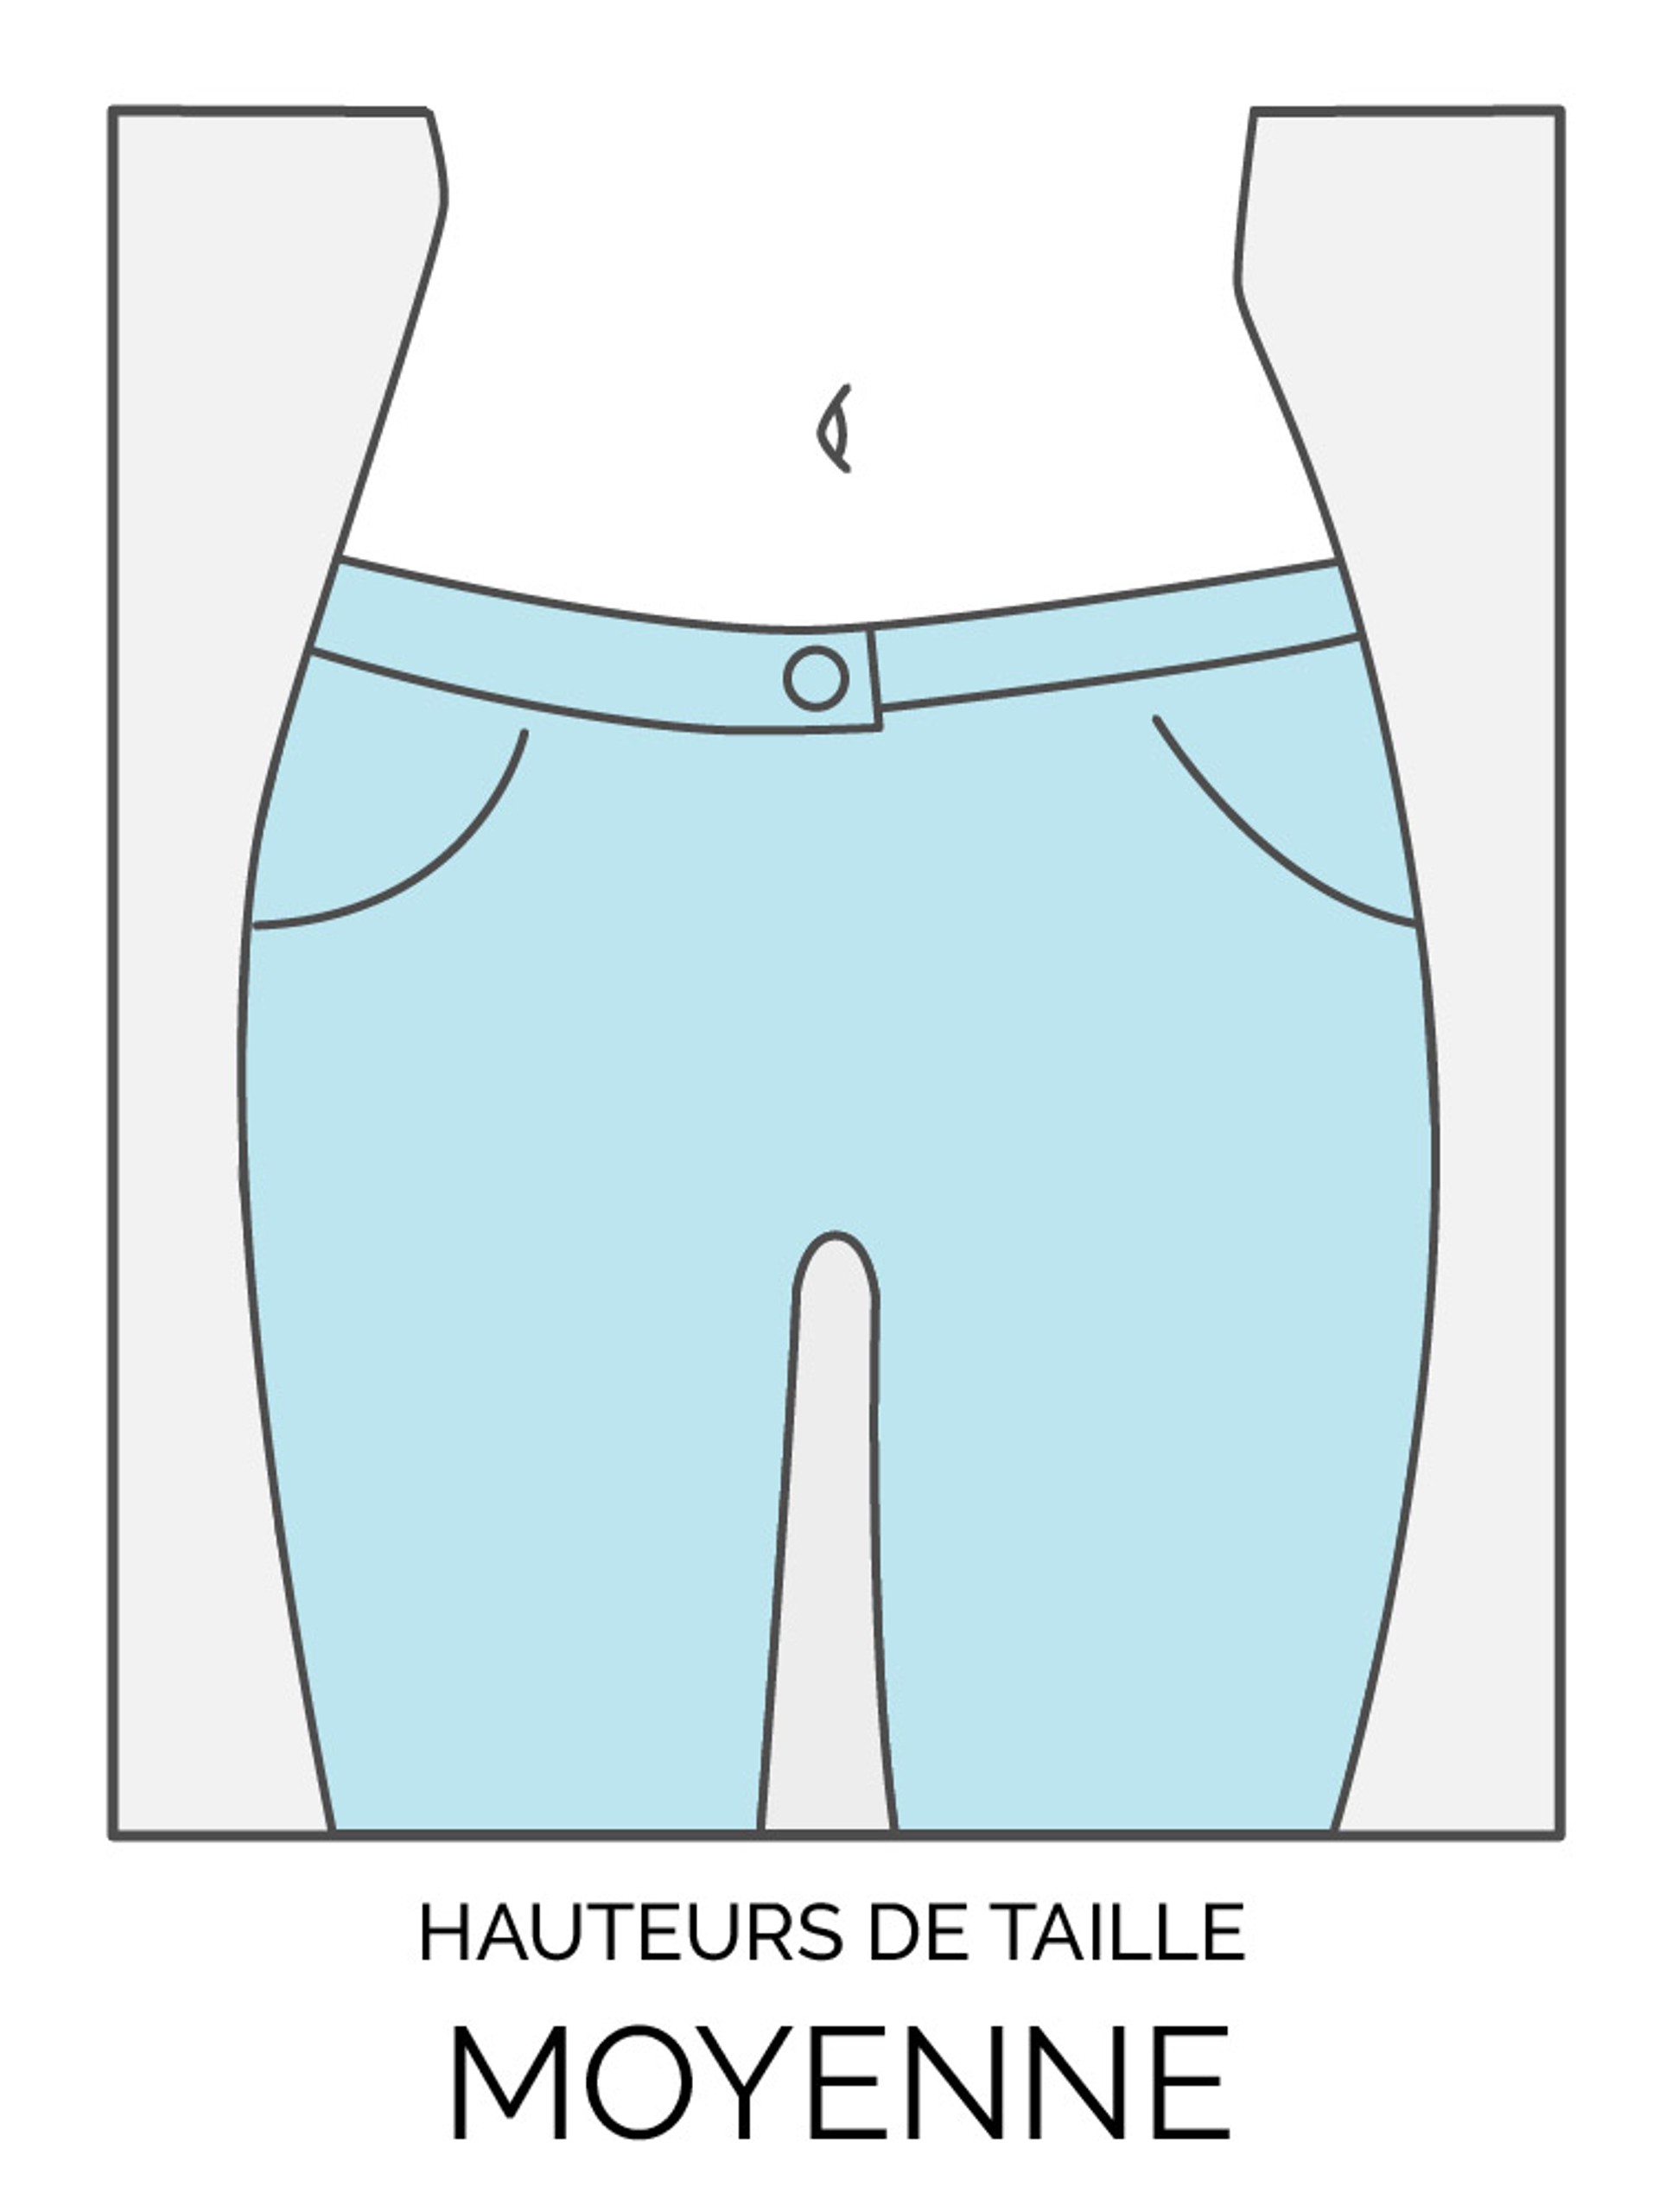 Taille moyenne